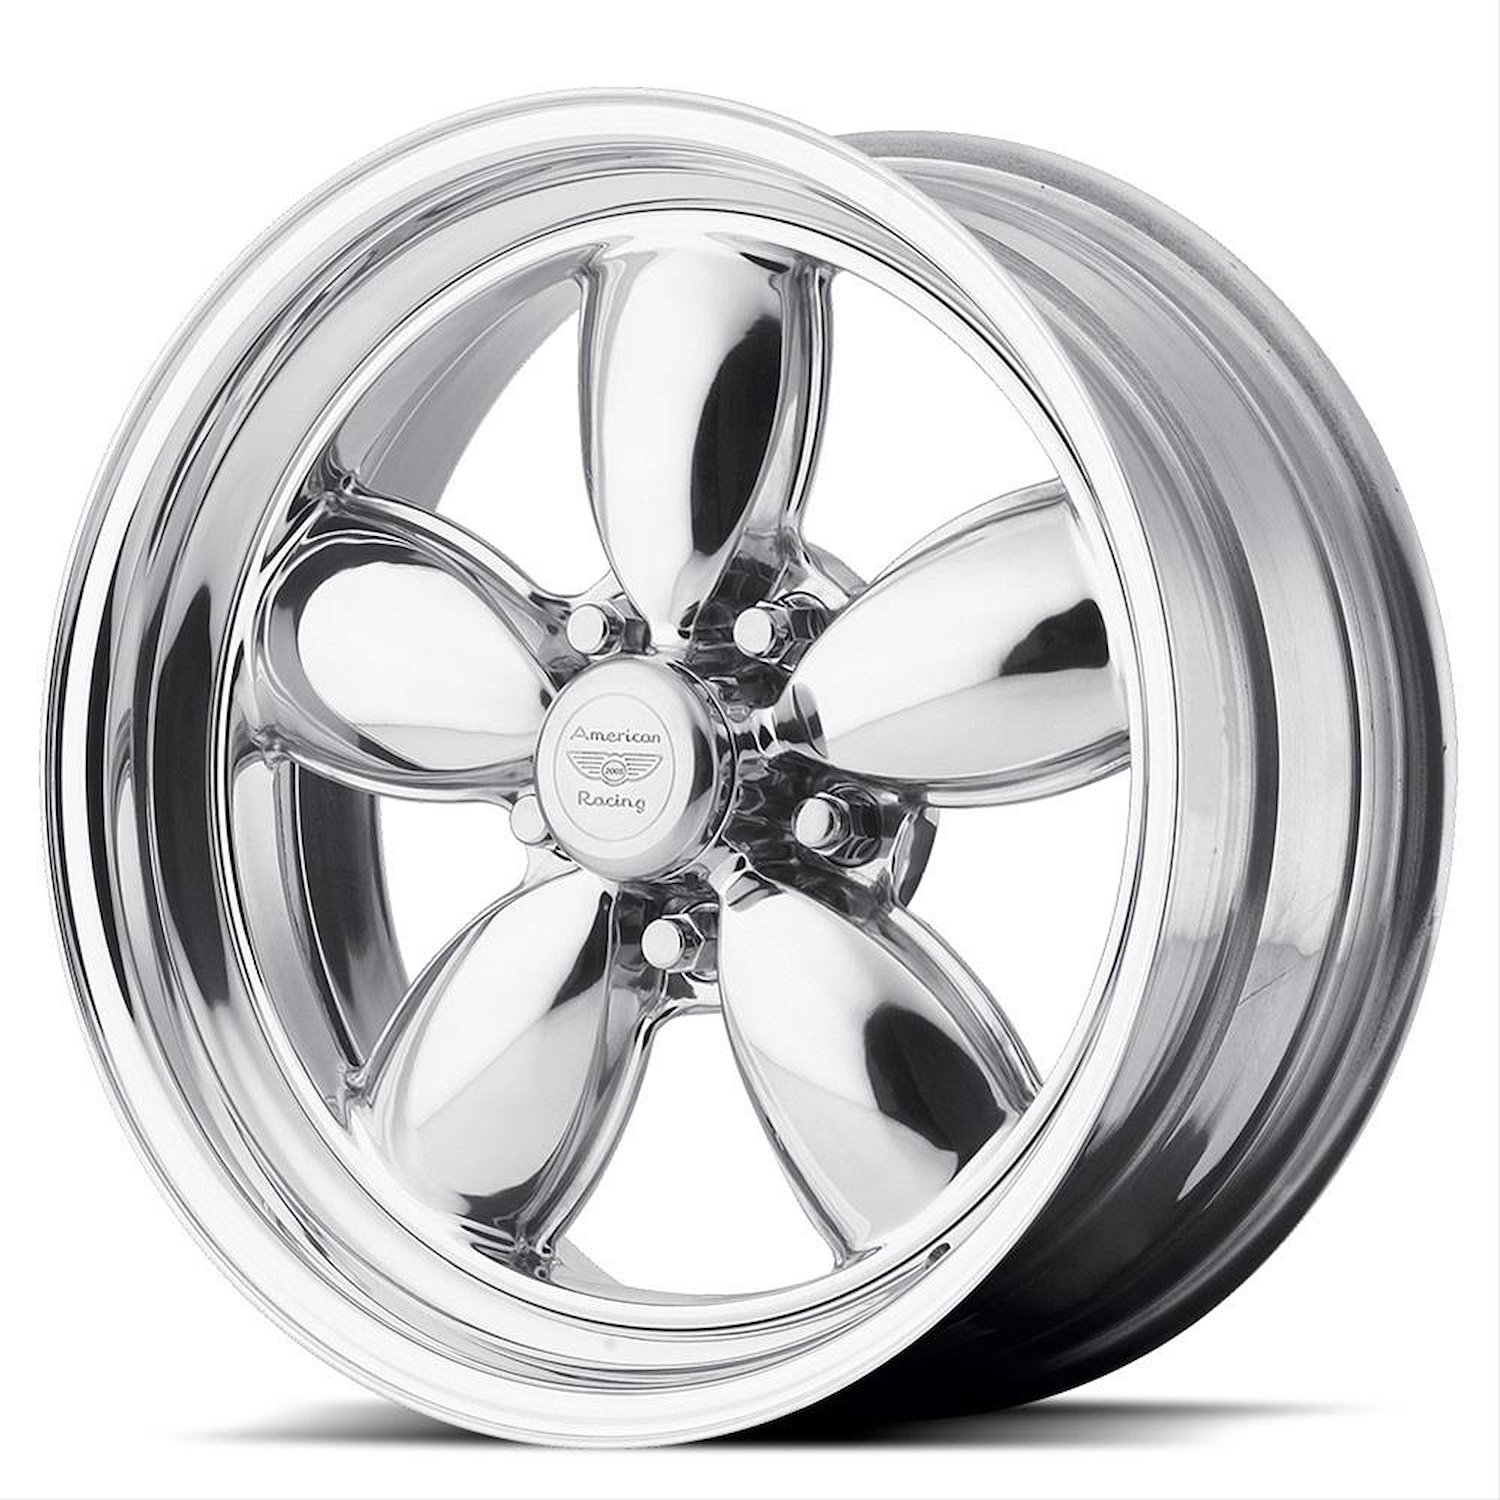 AMERICAN RACING CLASSIC 200S TWO-PIECE POLISHED 17 x 9.5 5X4.75 -6 5.01